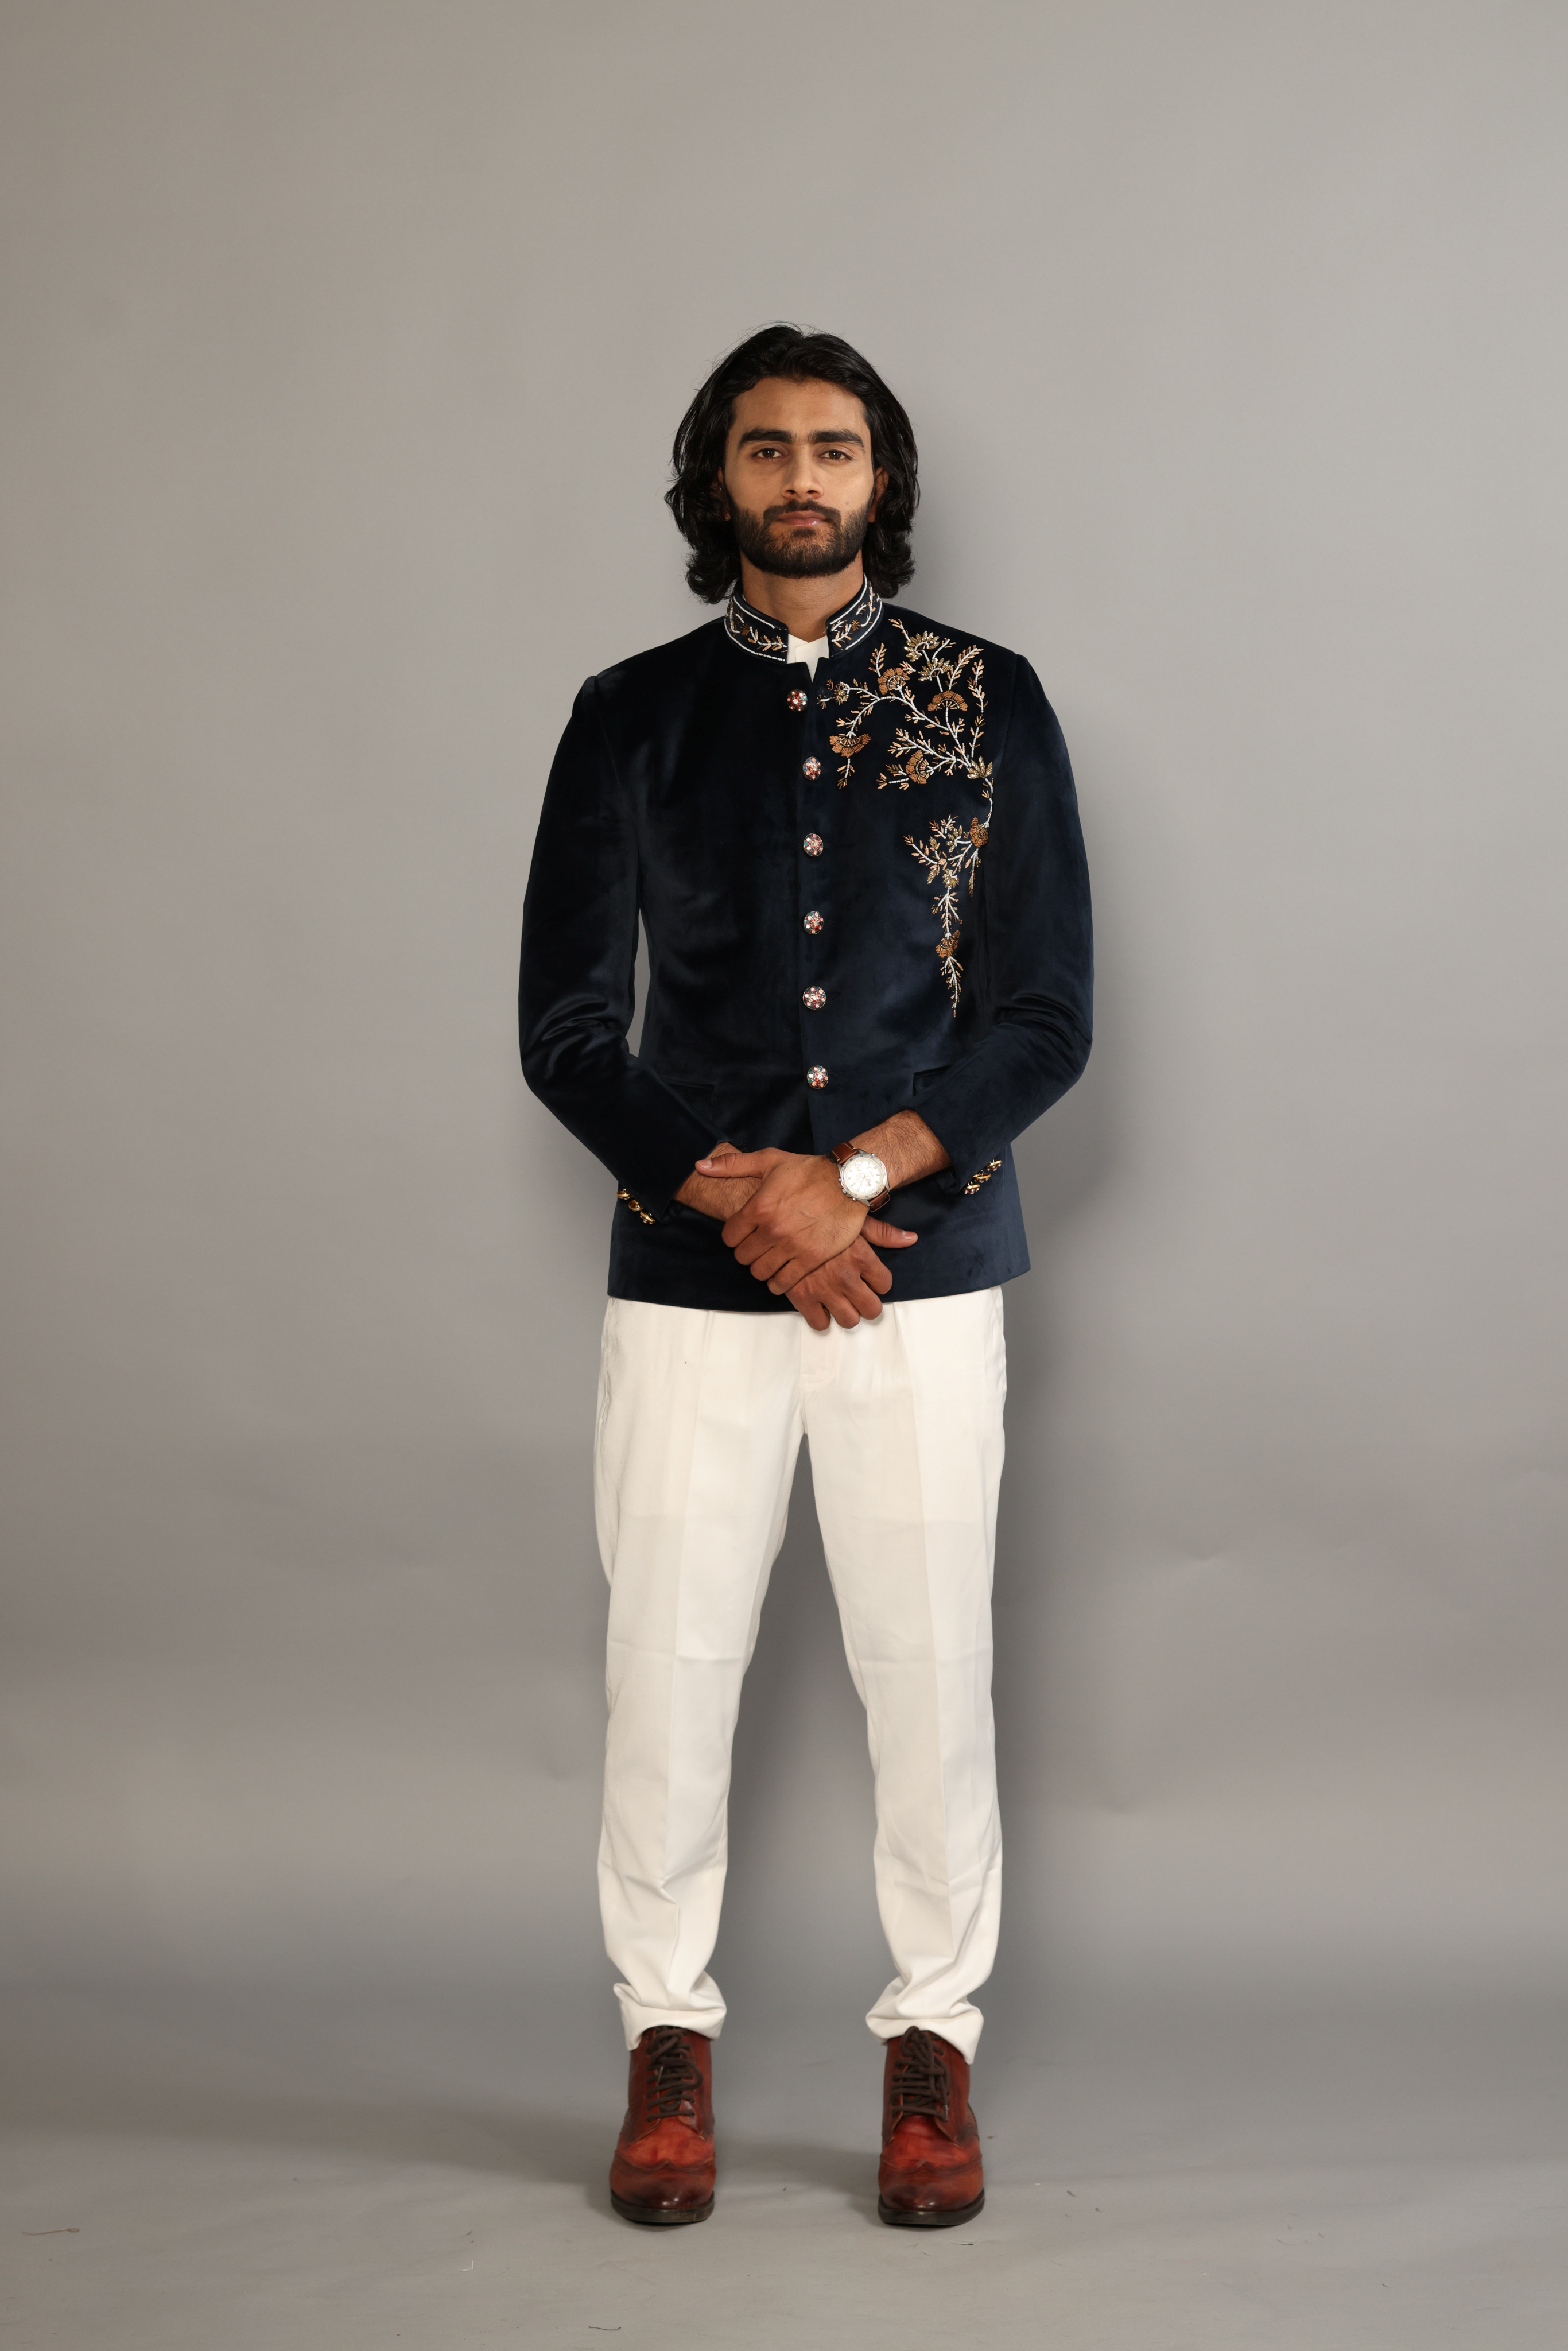 Alluring Navy Hand Embroidered Floral Motif Jodhpuri Bandhgala with White Trouser |Hand-Enameled Buttons | Indo Western Antique Classic Work|